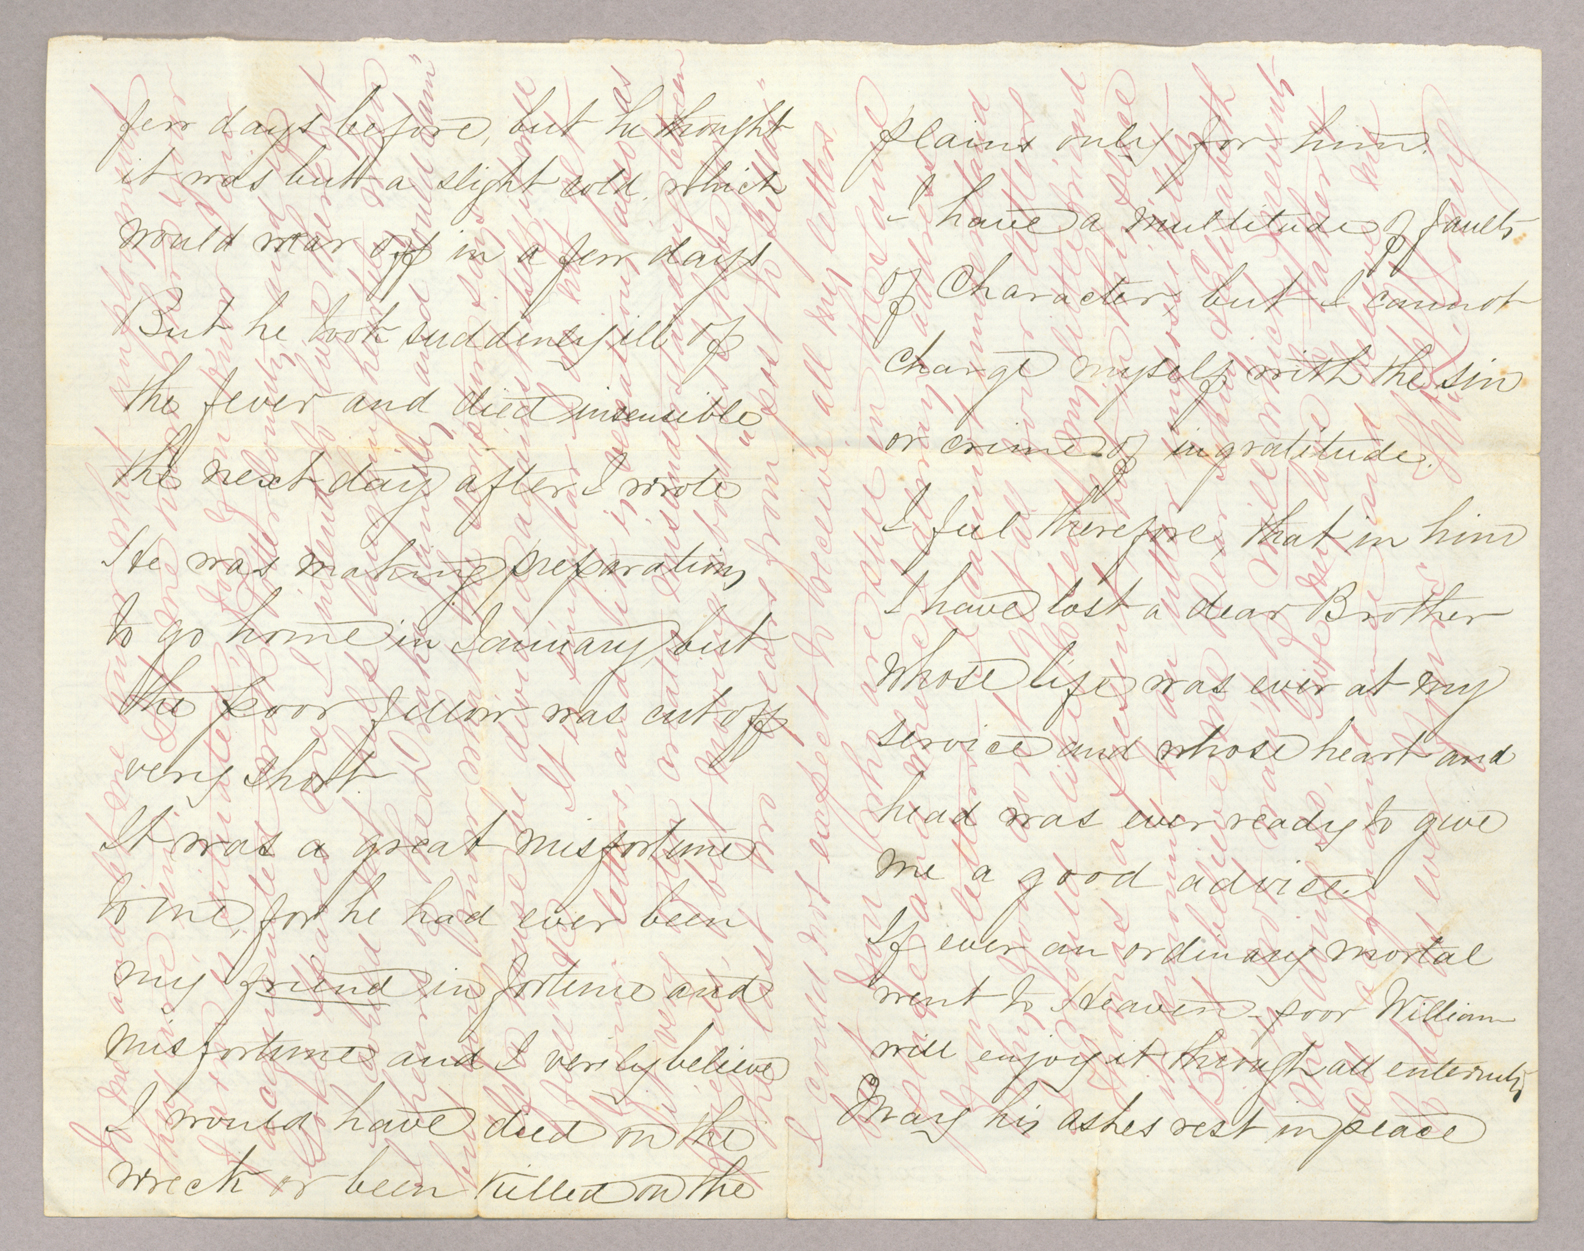 Letter. Tho[ma]s L[owry] Young, Fort Yuma, California, to "Dear Johny" [John E. Brownlee], n. p., Pages 2-3